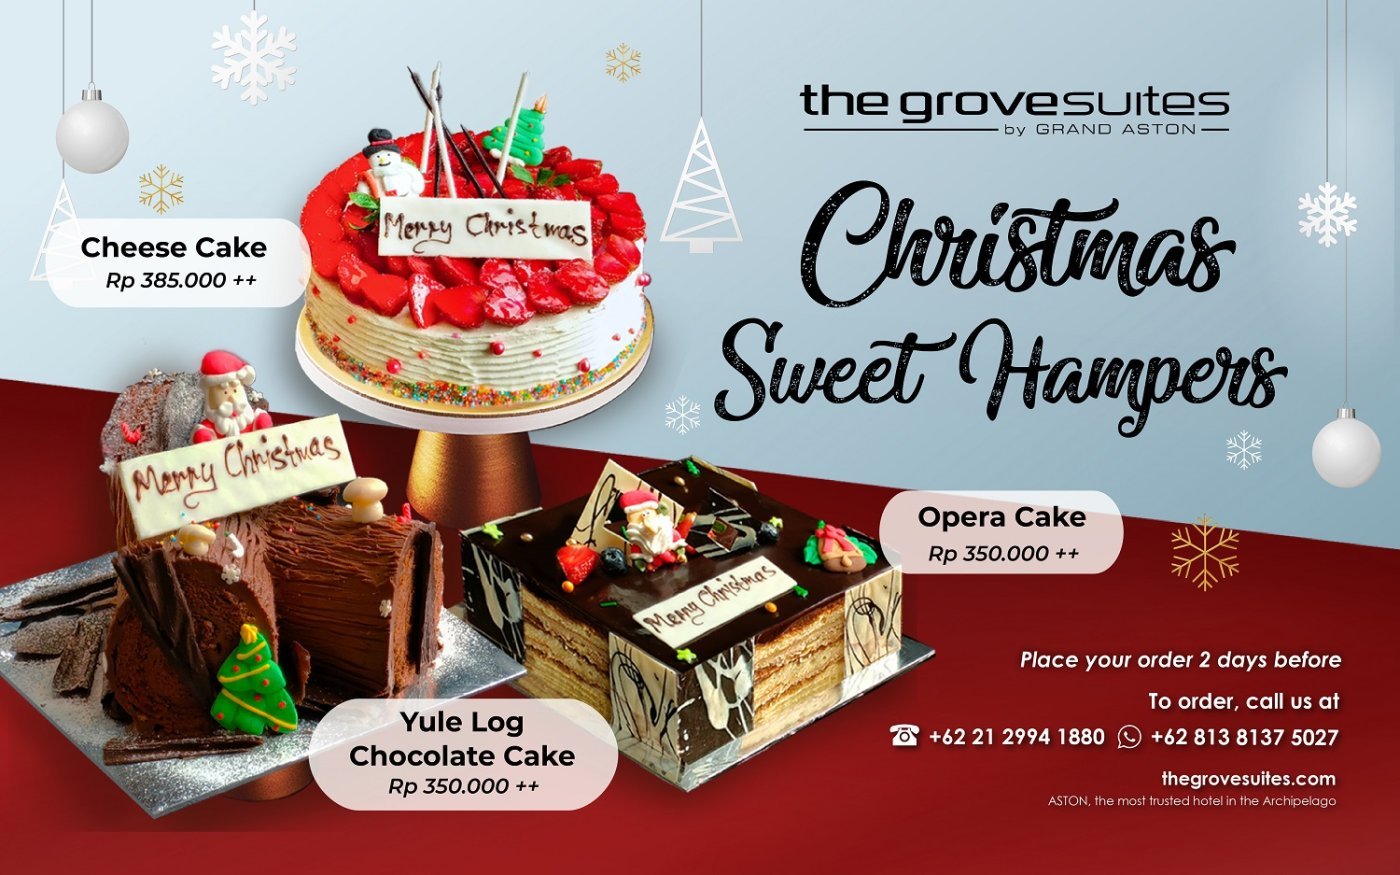 The Grove Suites Christmas Hampers